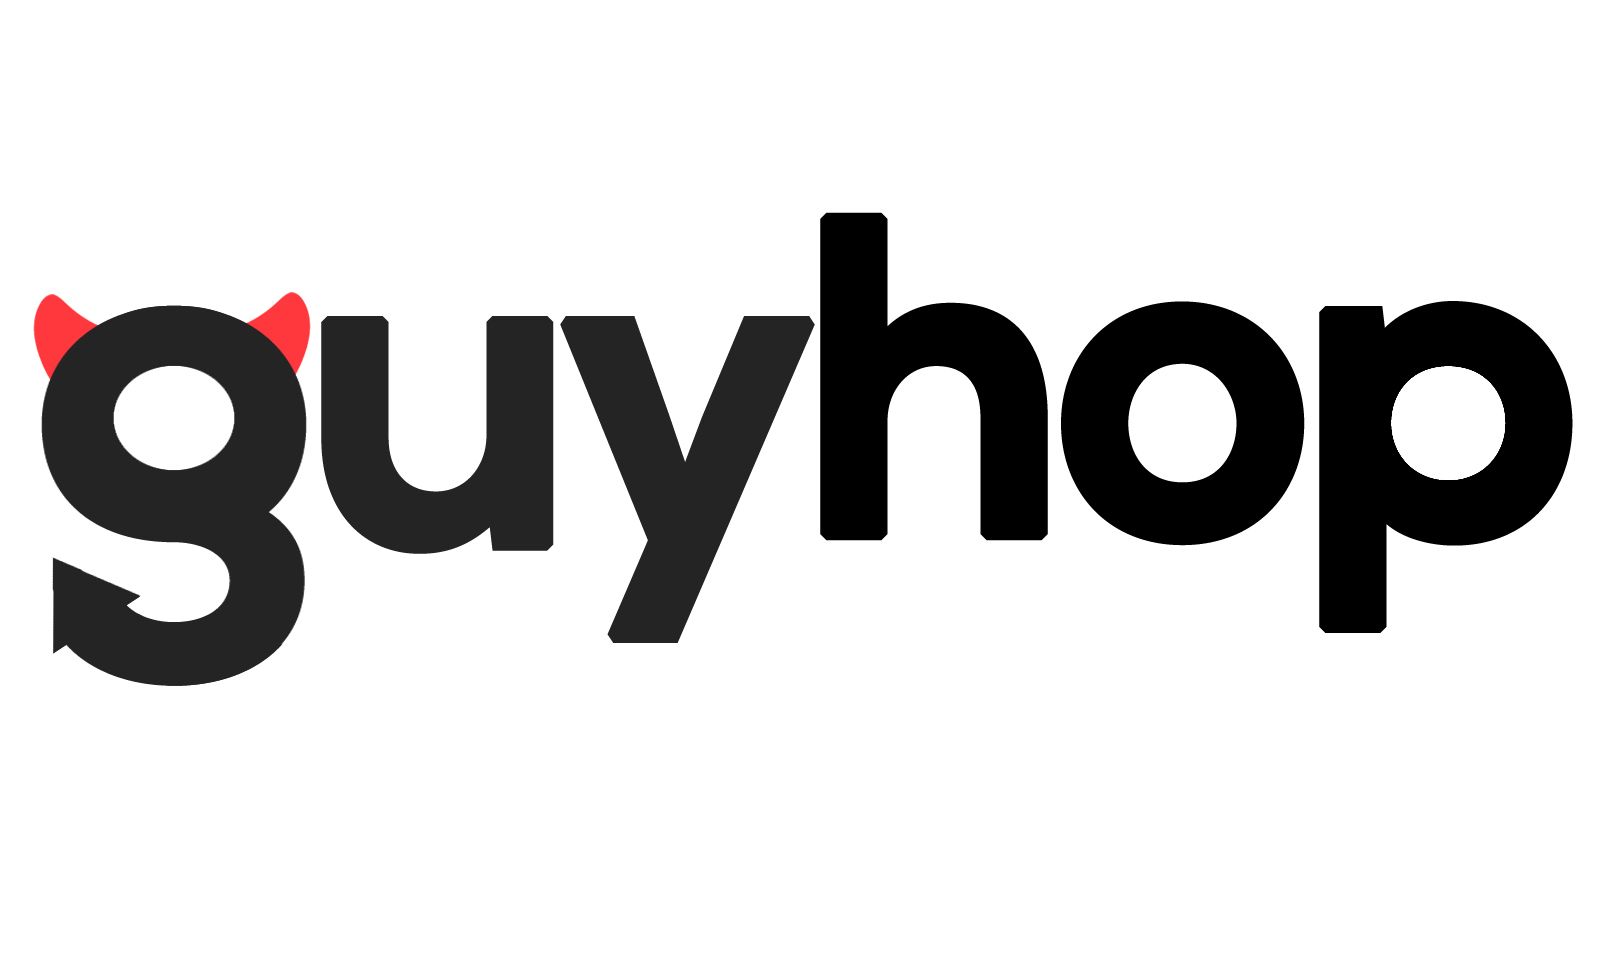 Guyhop Launches, Offering X-Rated Hookups for Gay Men